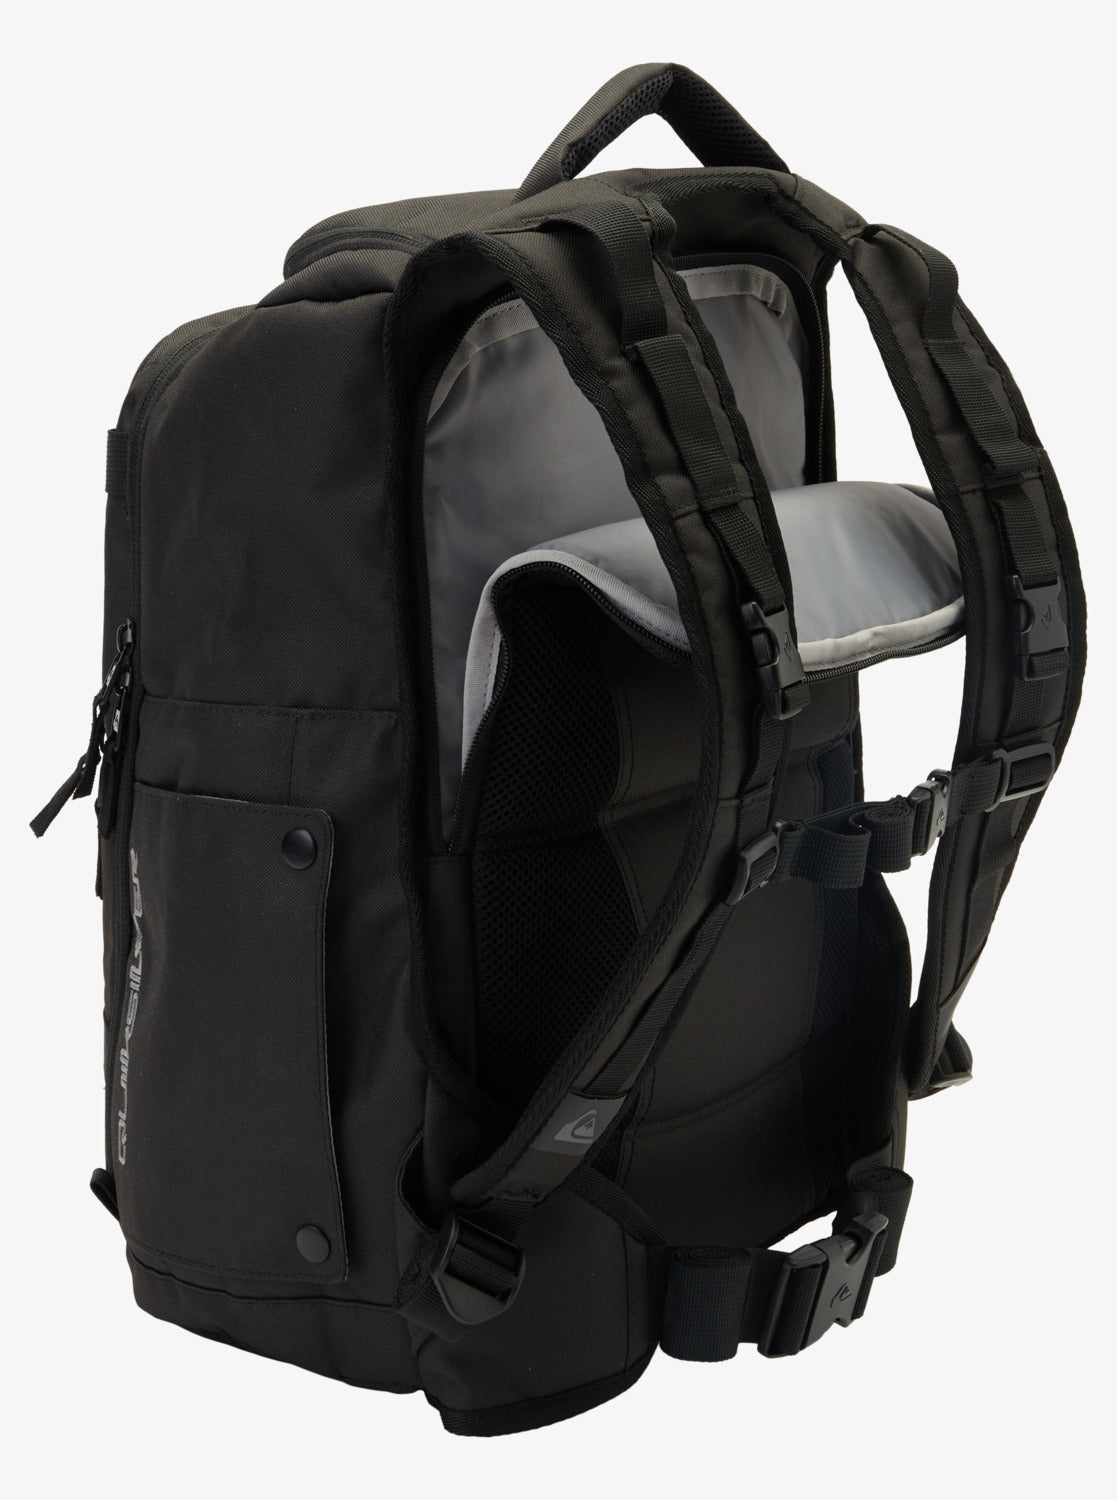 Quiksilver Grenade 32 L Large Premium Backpack in black with computer sleeve opened